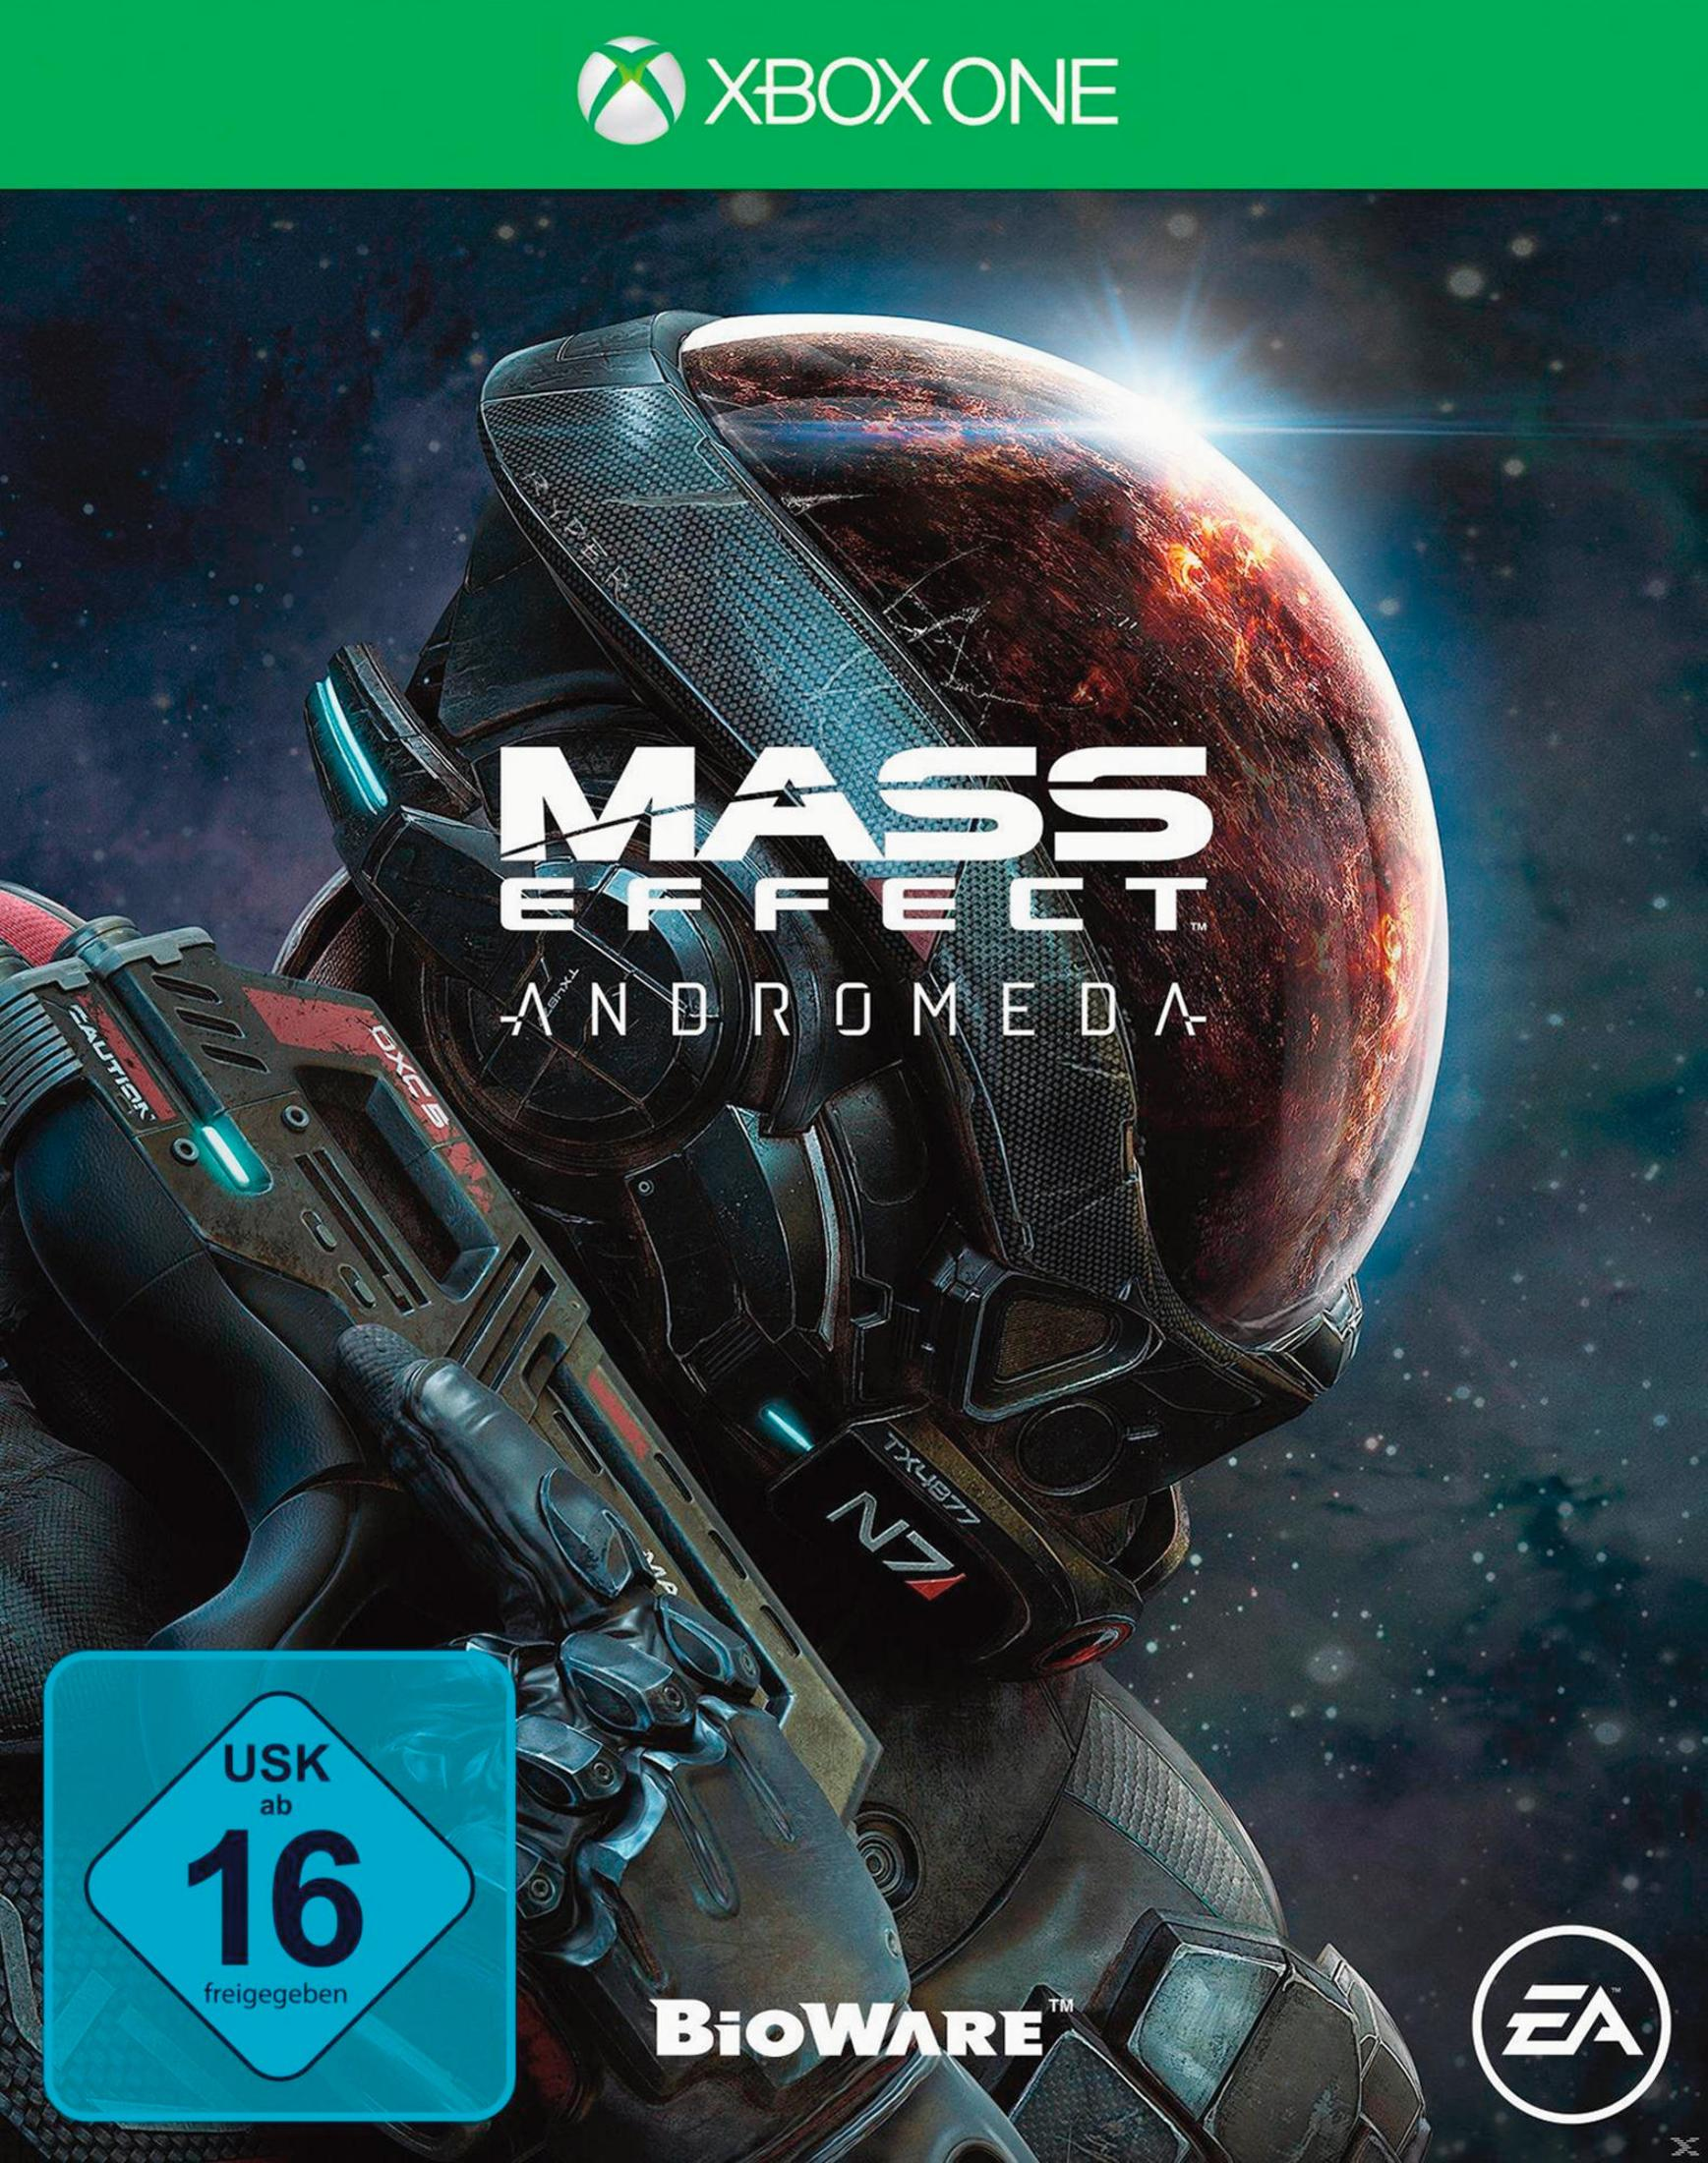 Mass Effect Andromeda One] - [Xbox